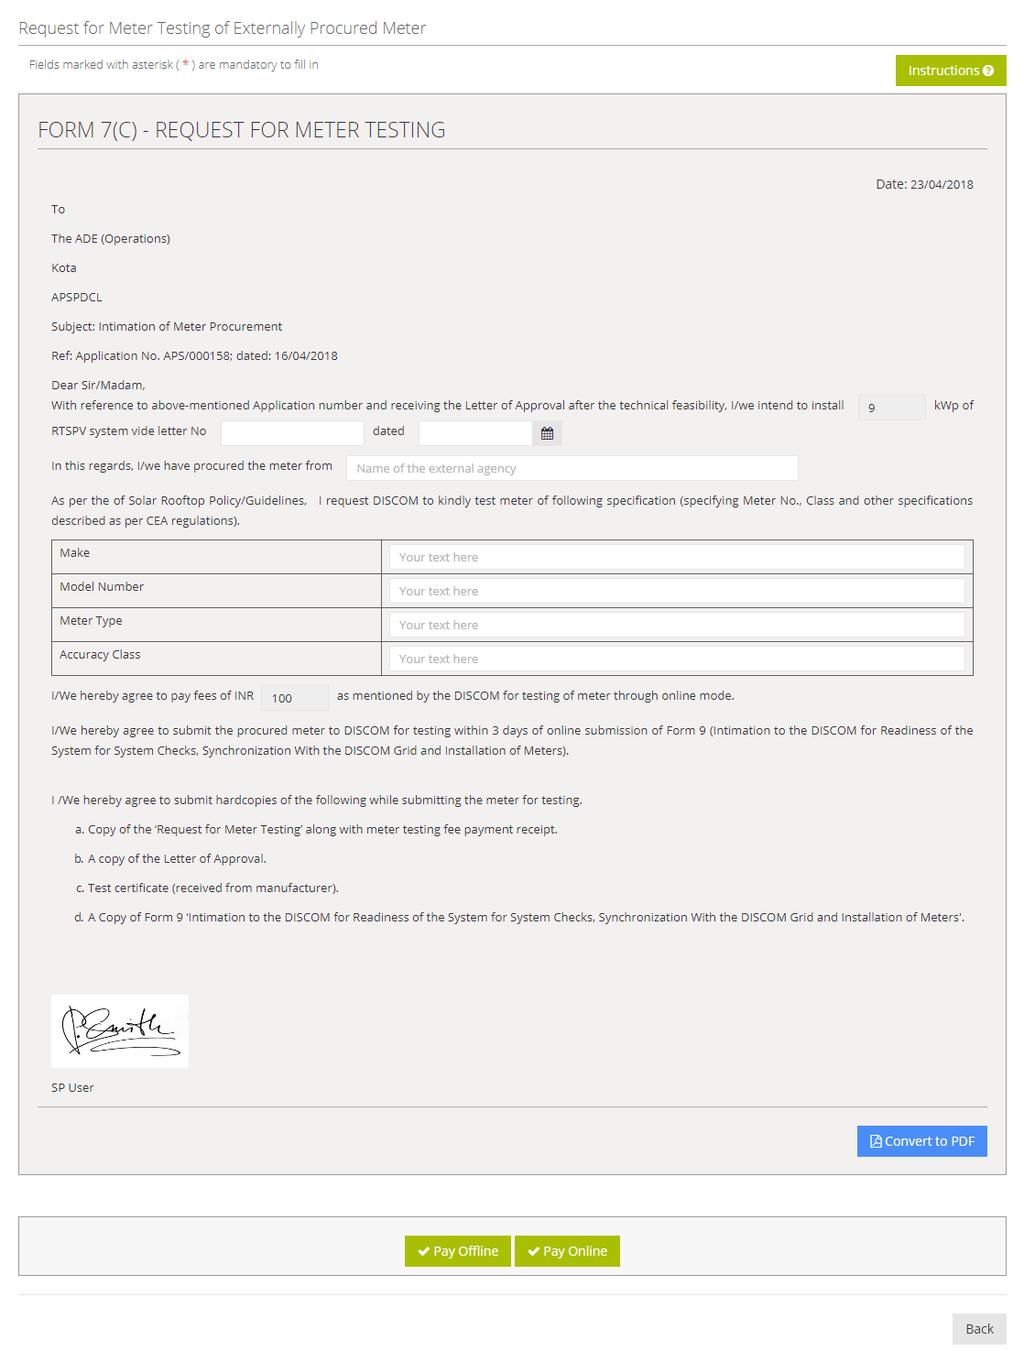 Instructions to fill and submit form Enter Letter of Approval Number.